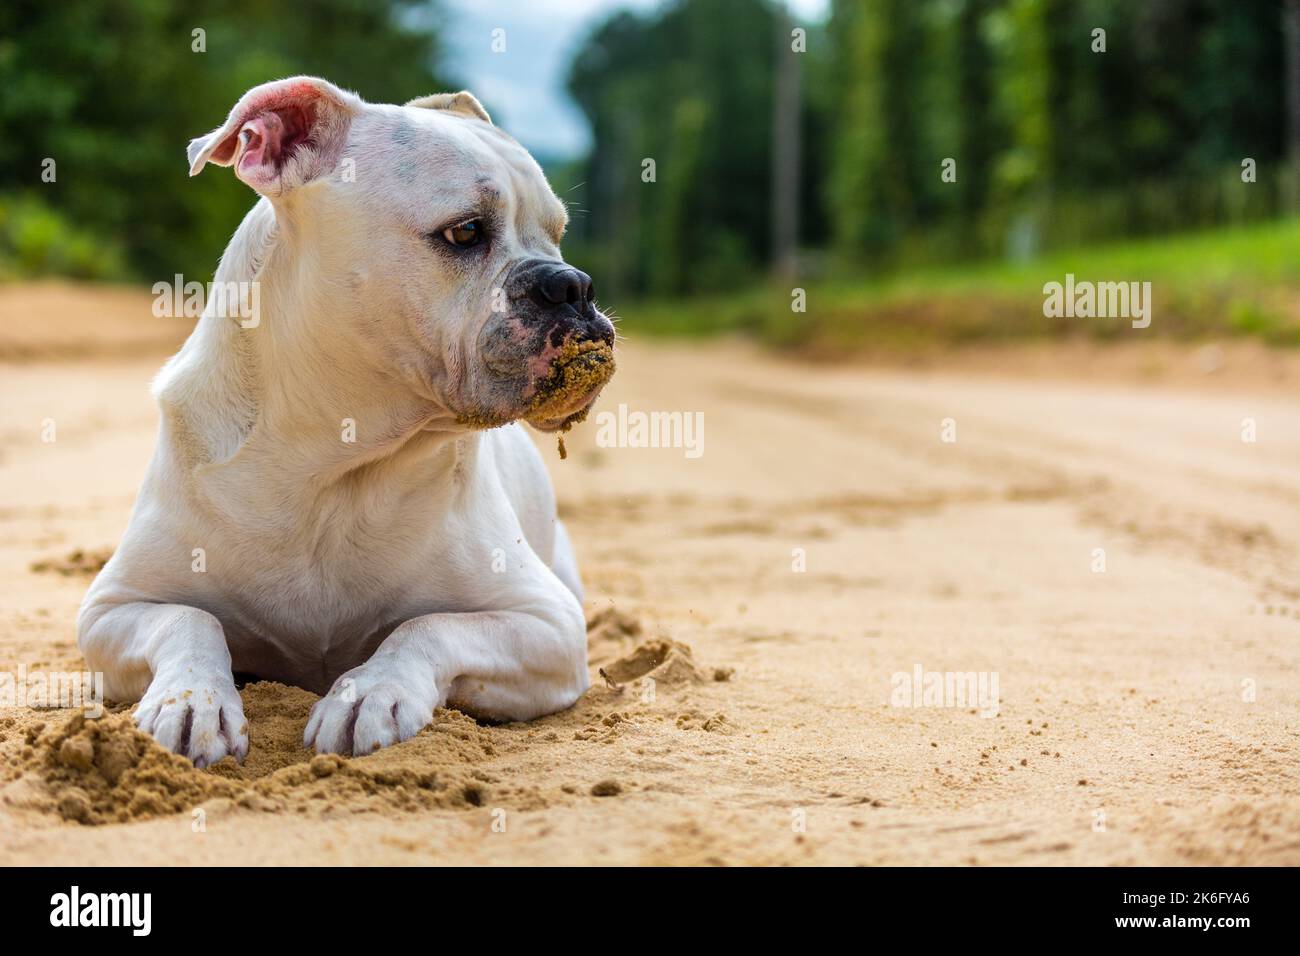 Olde English Bulldogge, Bulldog Lying Down on Dirt Road With Sand On Mouth Stock Photo